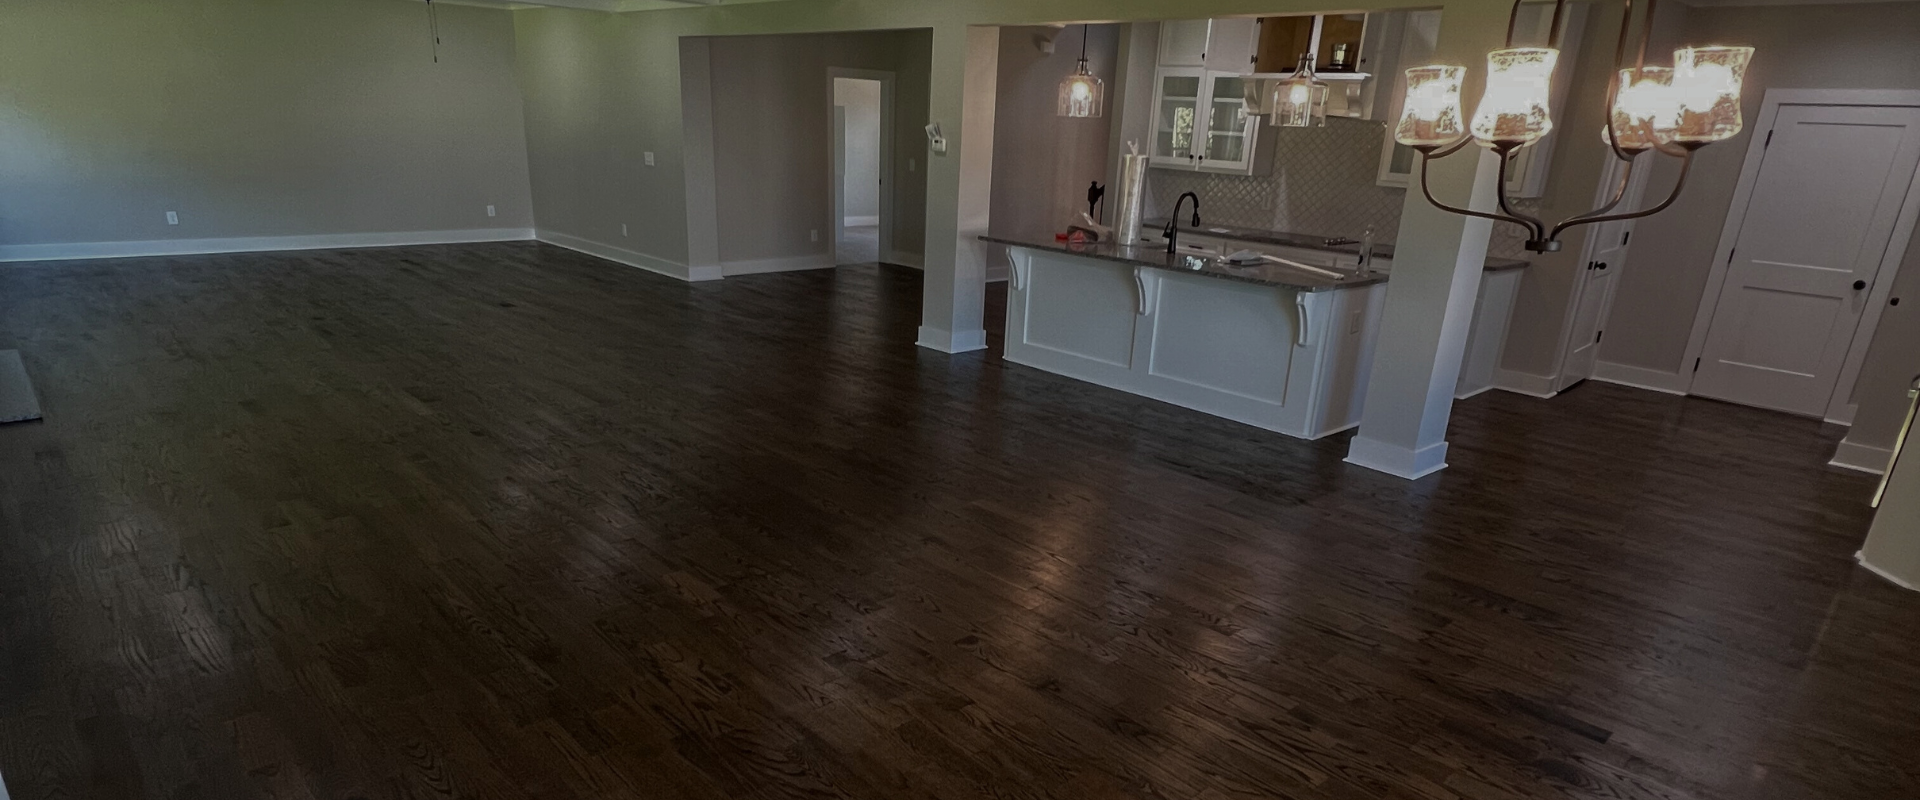 Quality Floors on a Budget: Transform Your Space for Less!